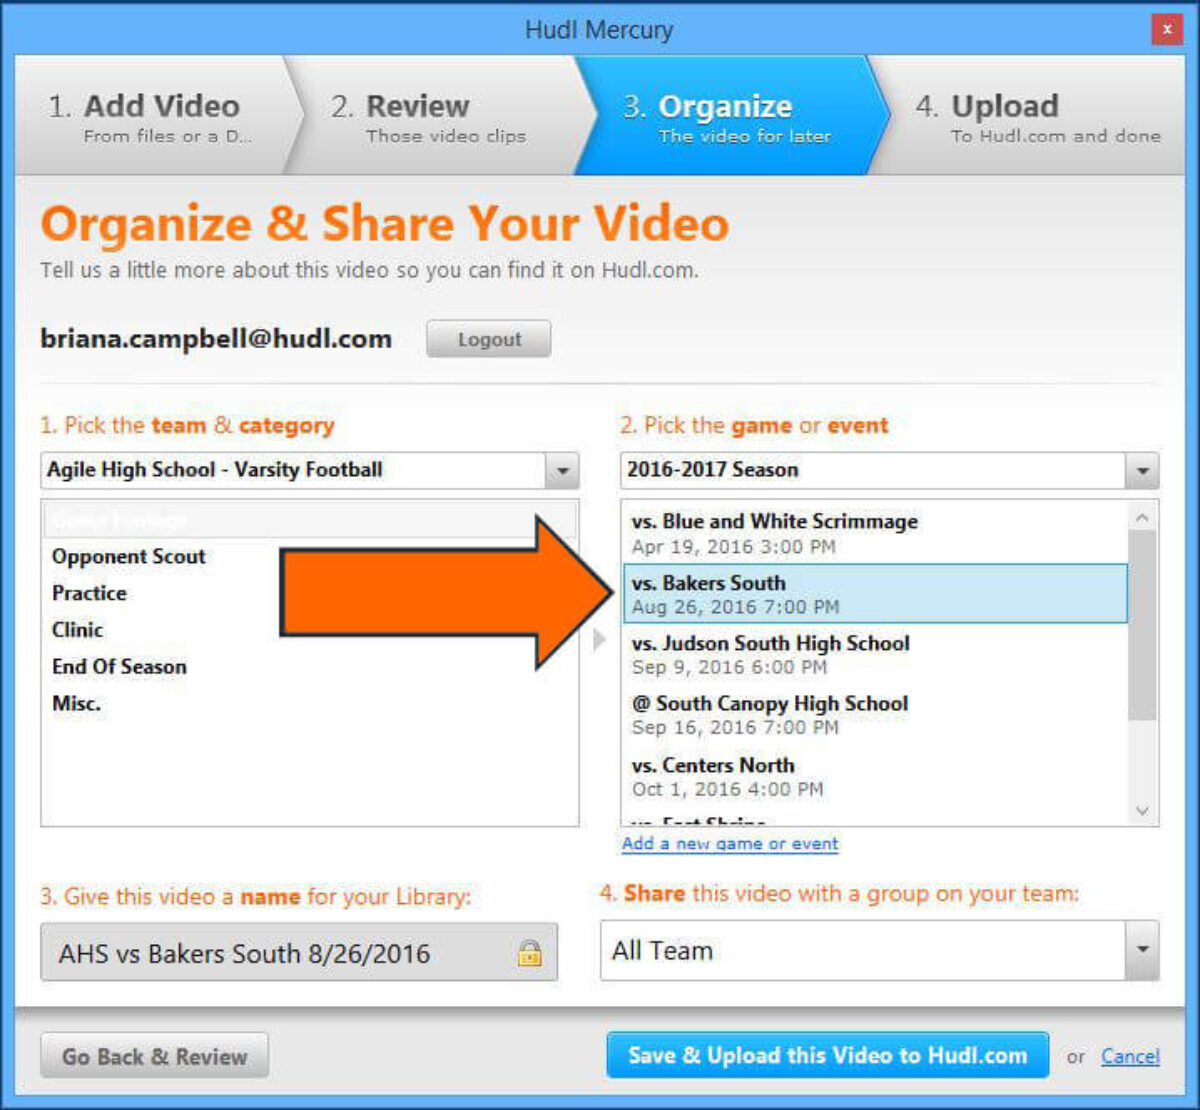 how to Download Hudl Mercury to Upload Video - Select a sched­ule entry to upload the video to or click Add a new game or event to cre­ate a new sched­ule entry.